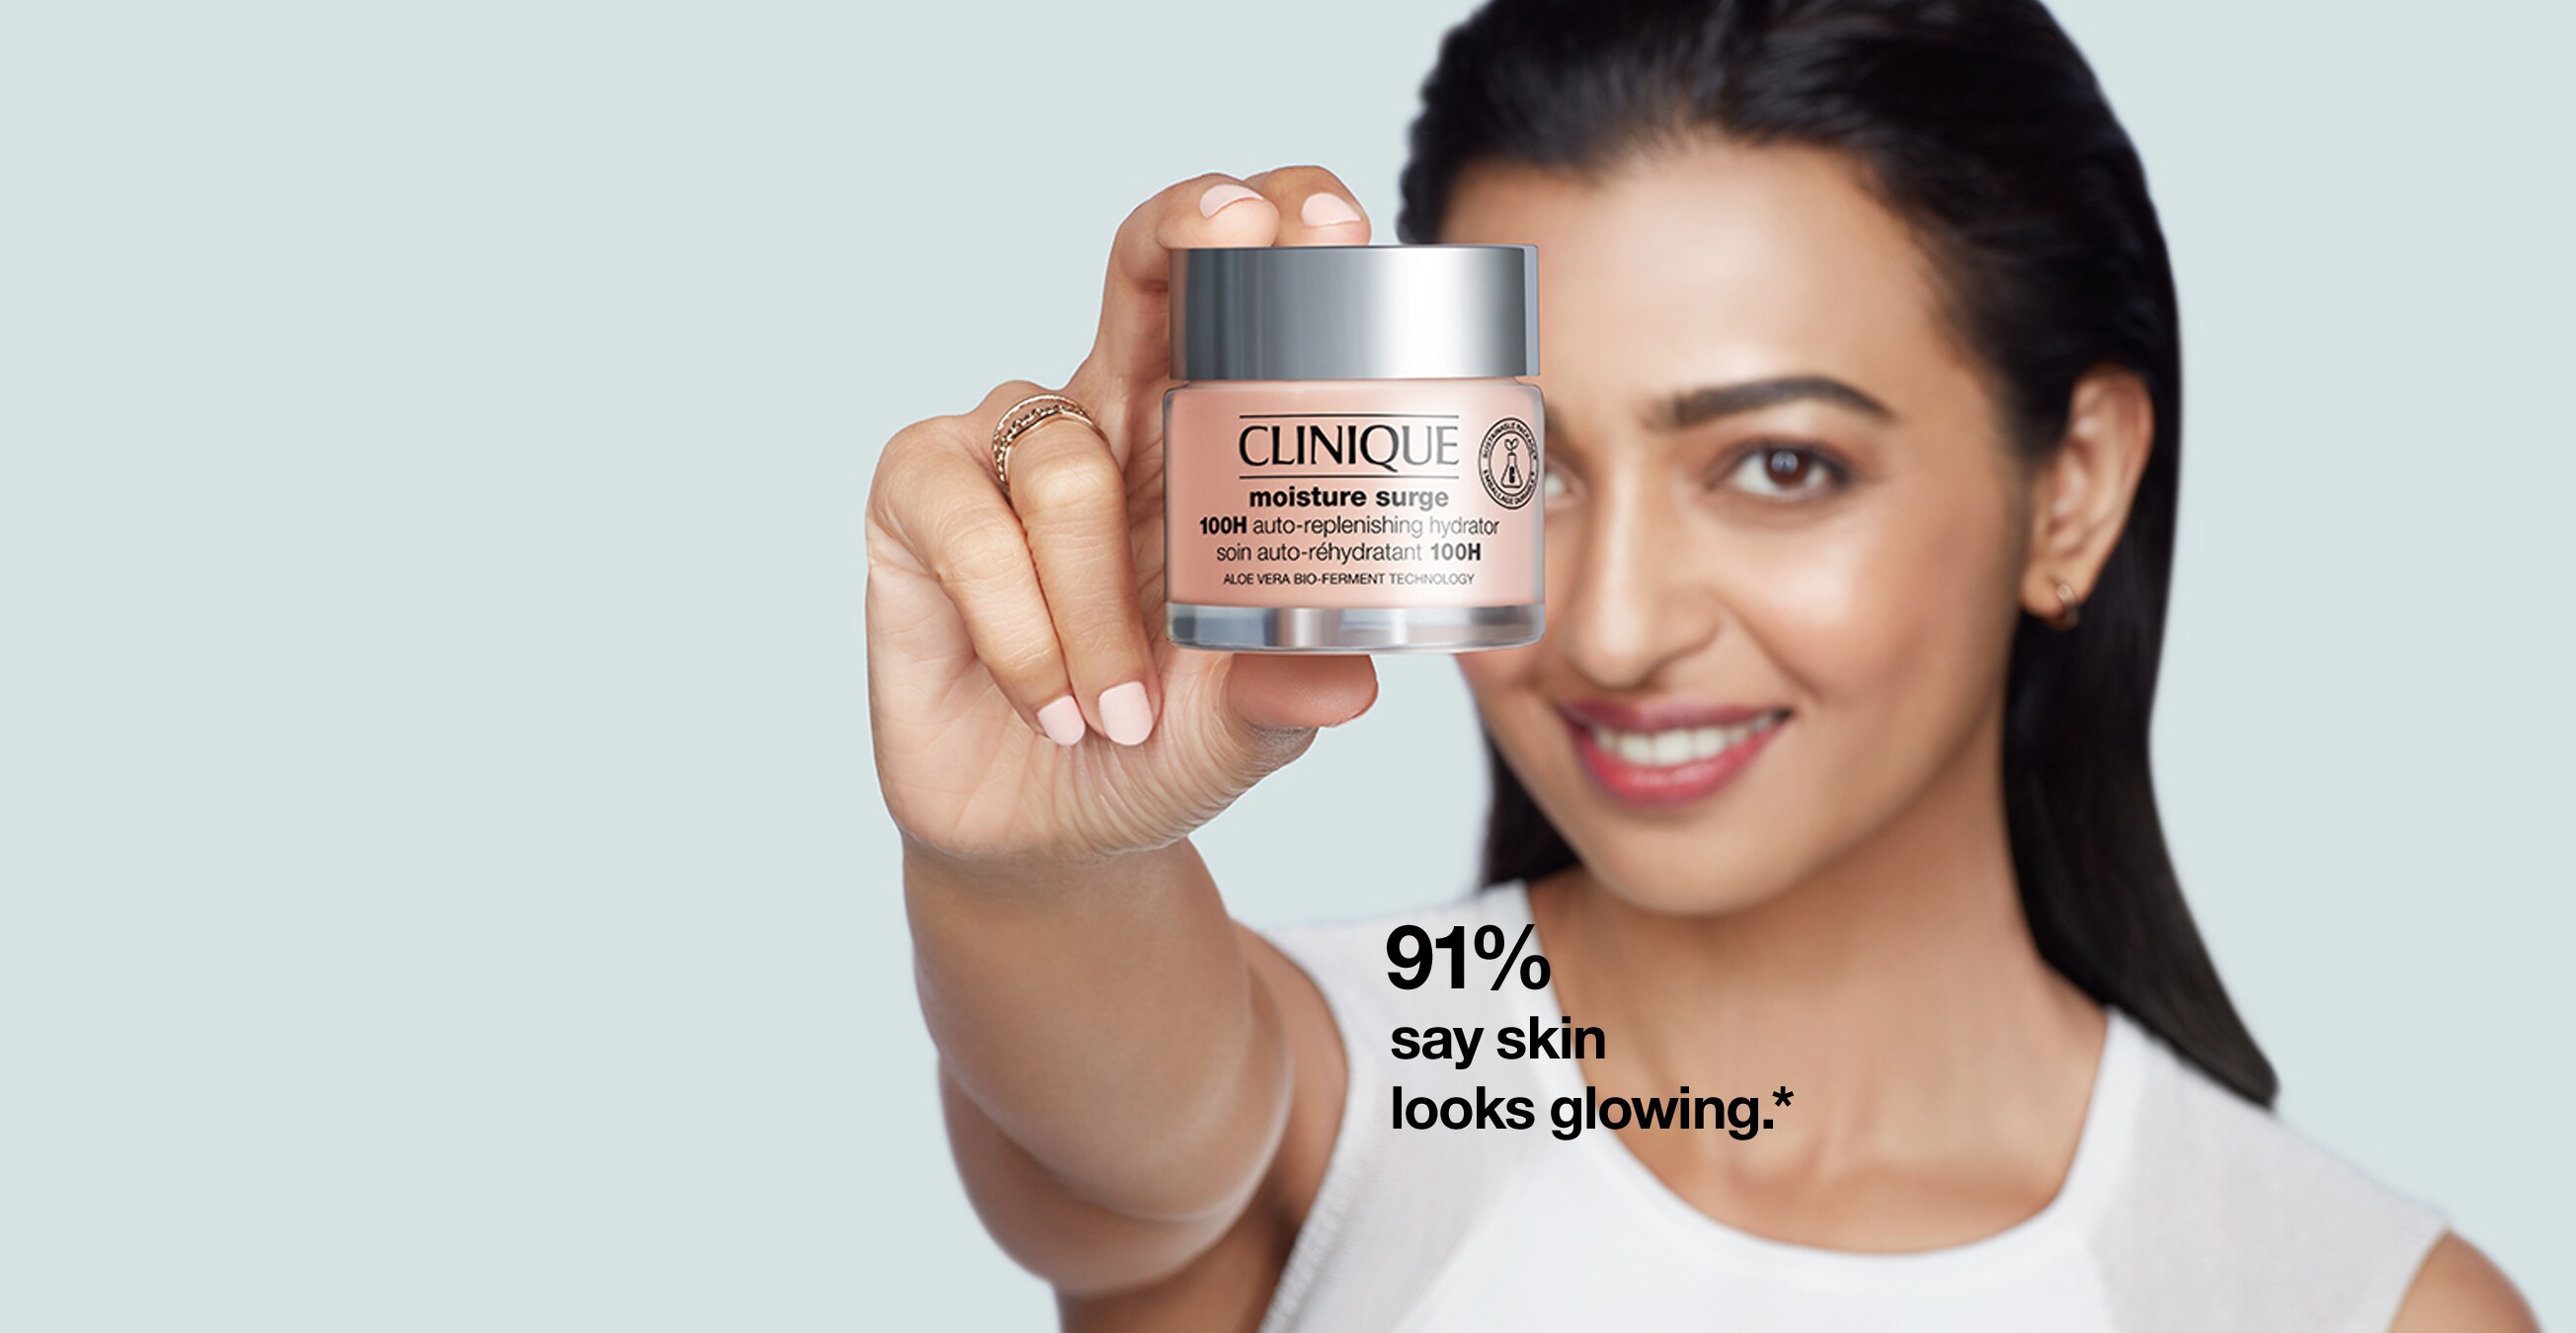 Clinique Bestsellers